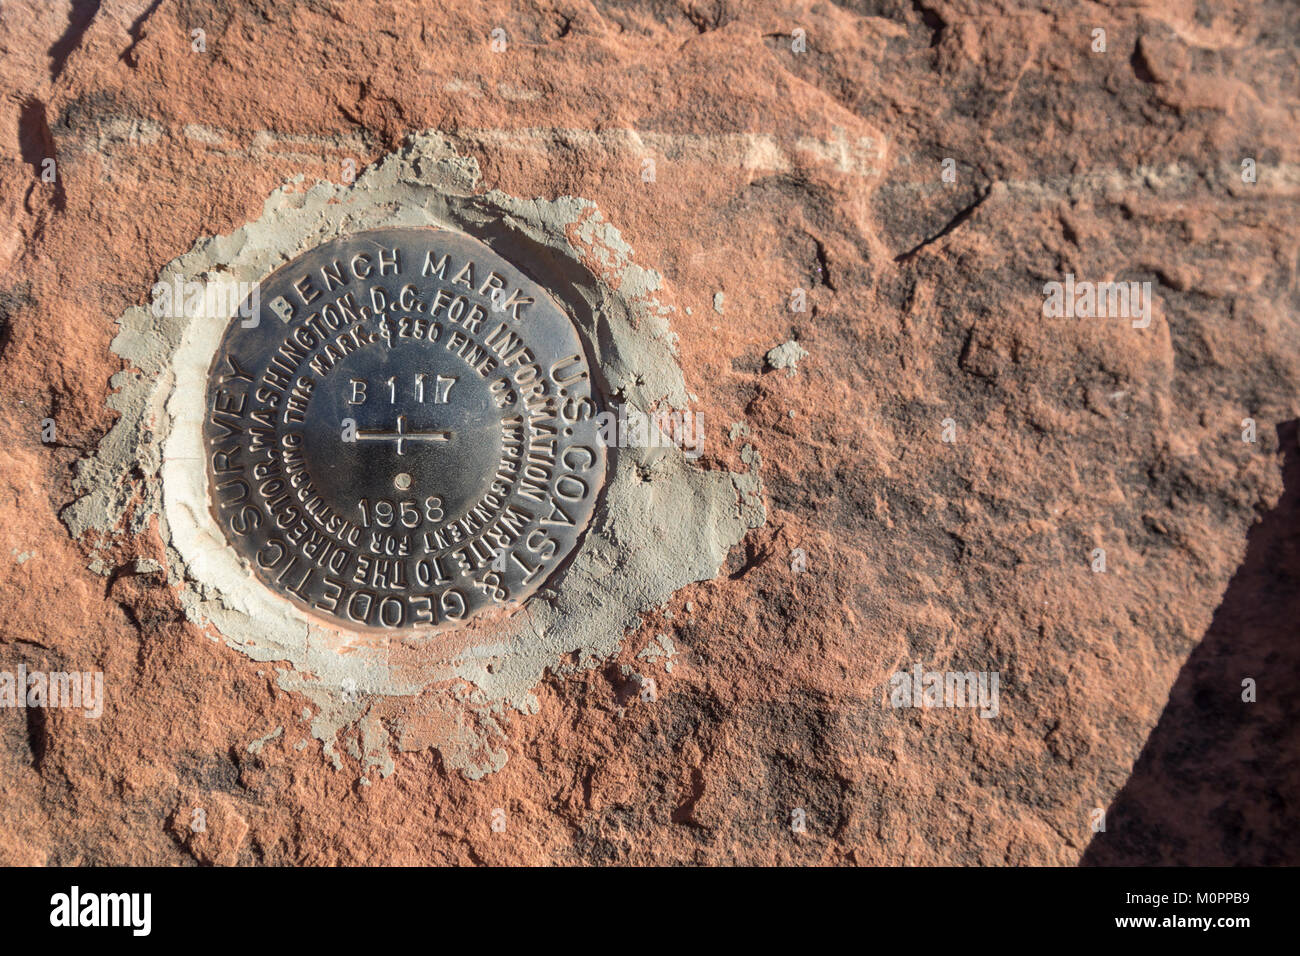 Blanding, Utah - A bench mark places by the U.S. National Geodetic Survey in Mule Canyon in Bears Ears National Monument Stock Photo